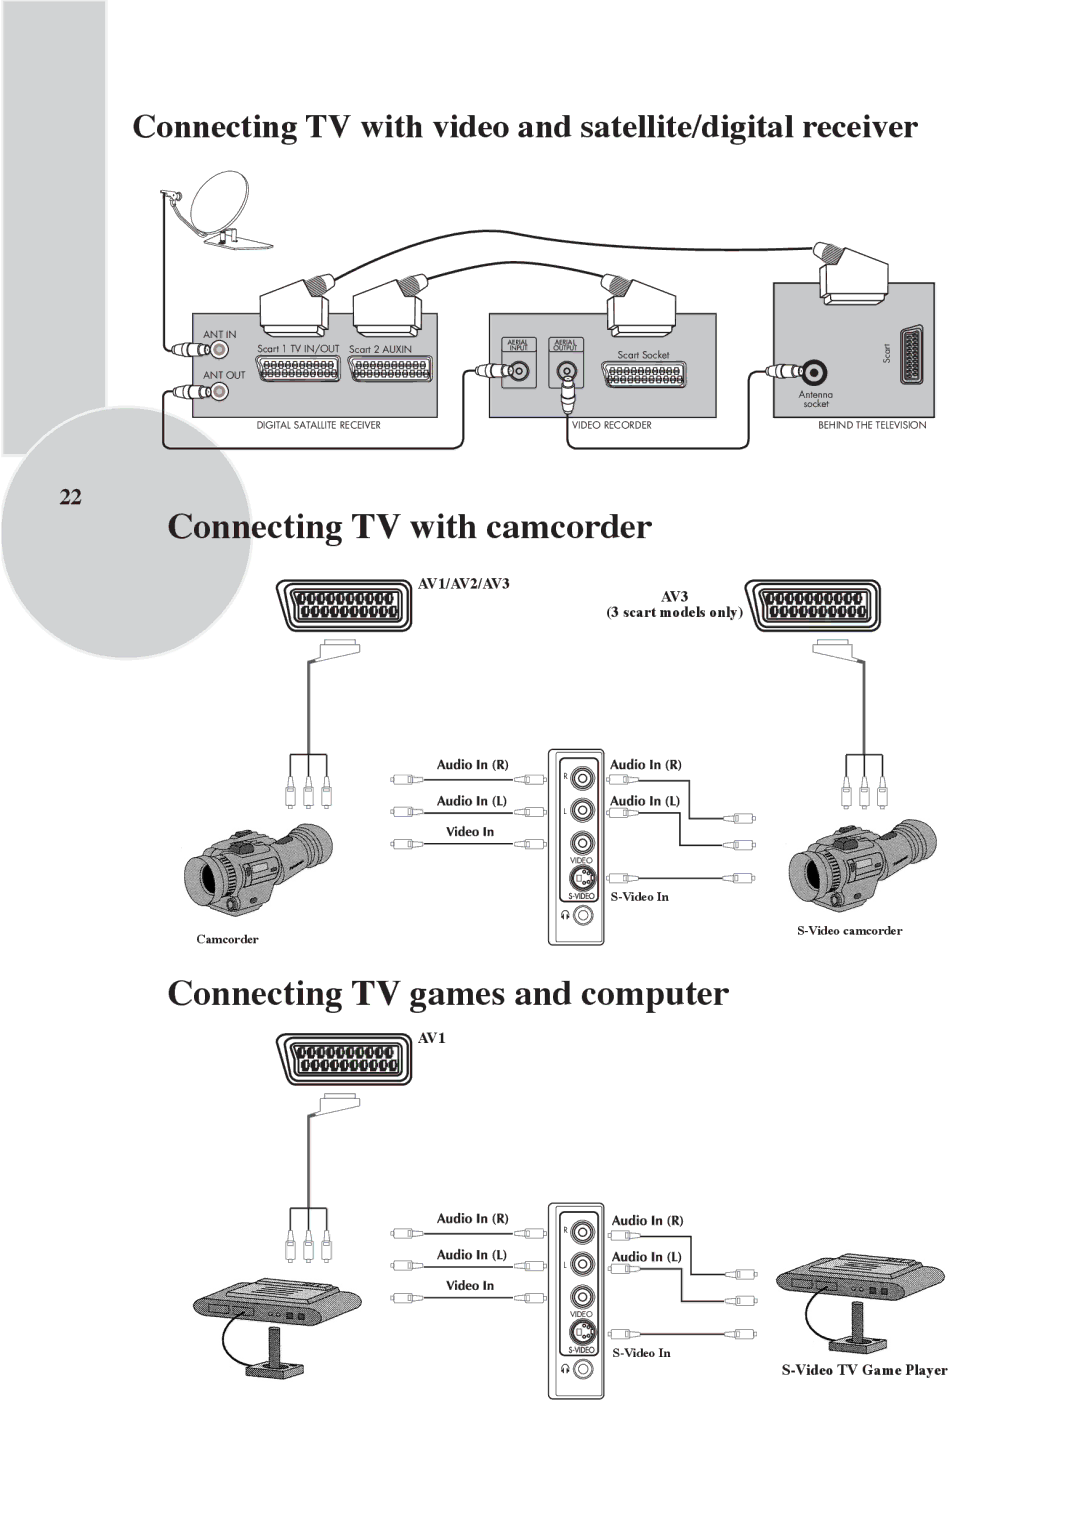 Beko F 972 SIYAH, F 772 GRI technical specifications Connecting TV with camcorder, Connecting TV games and computer 